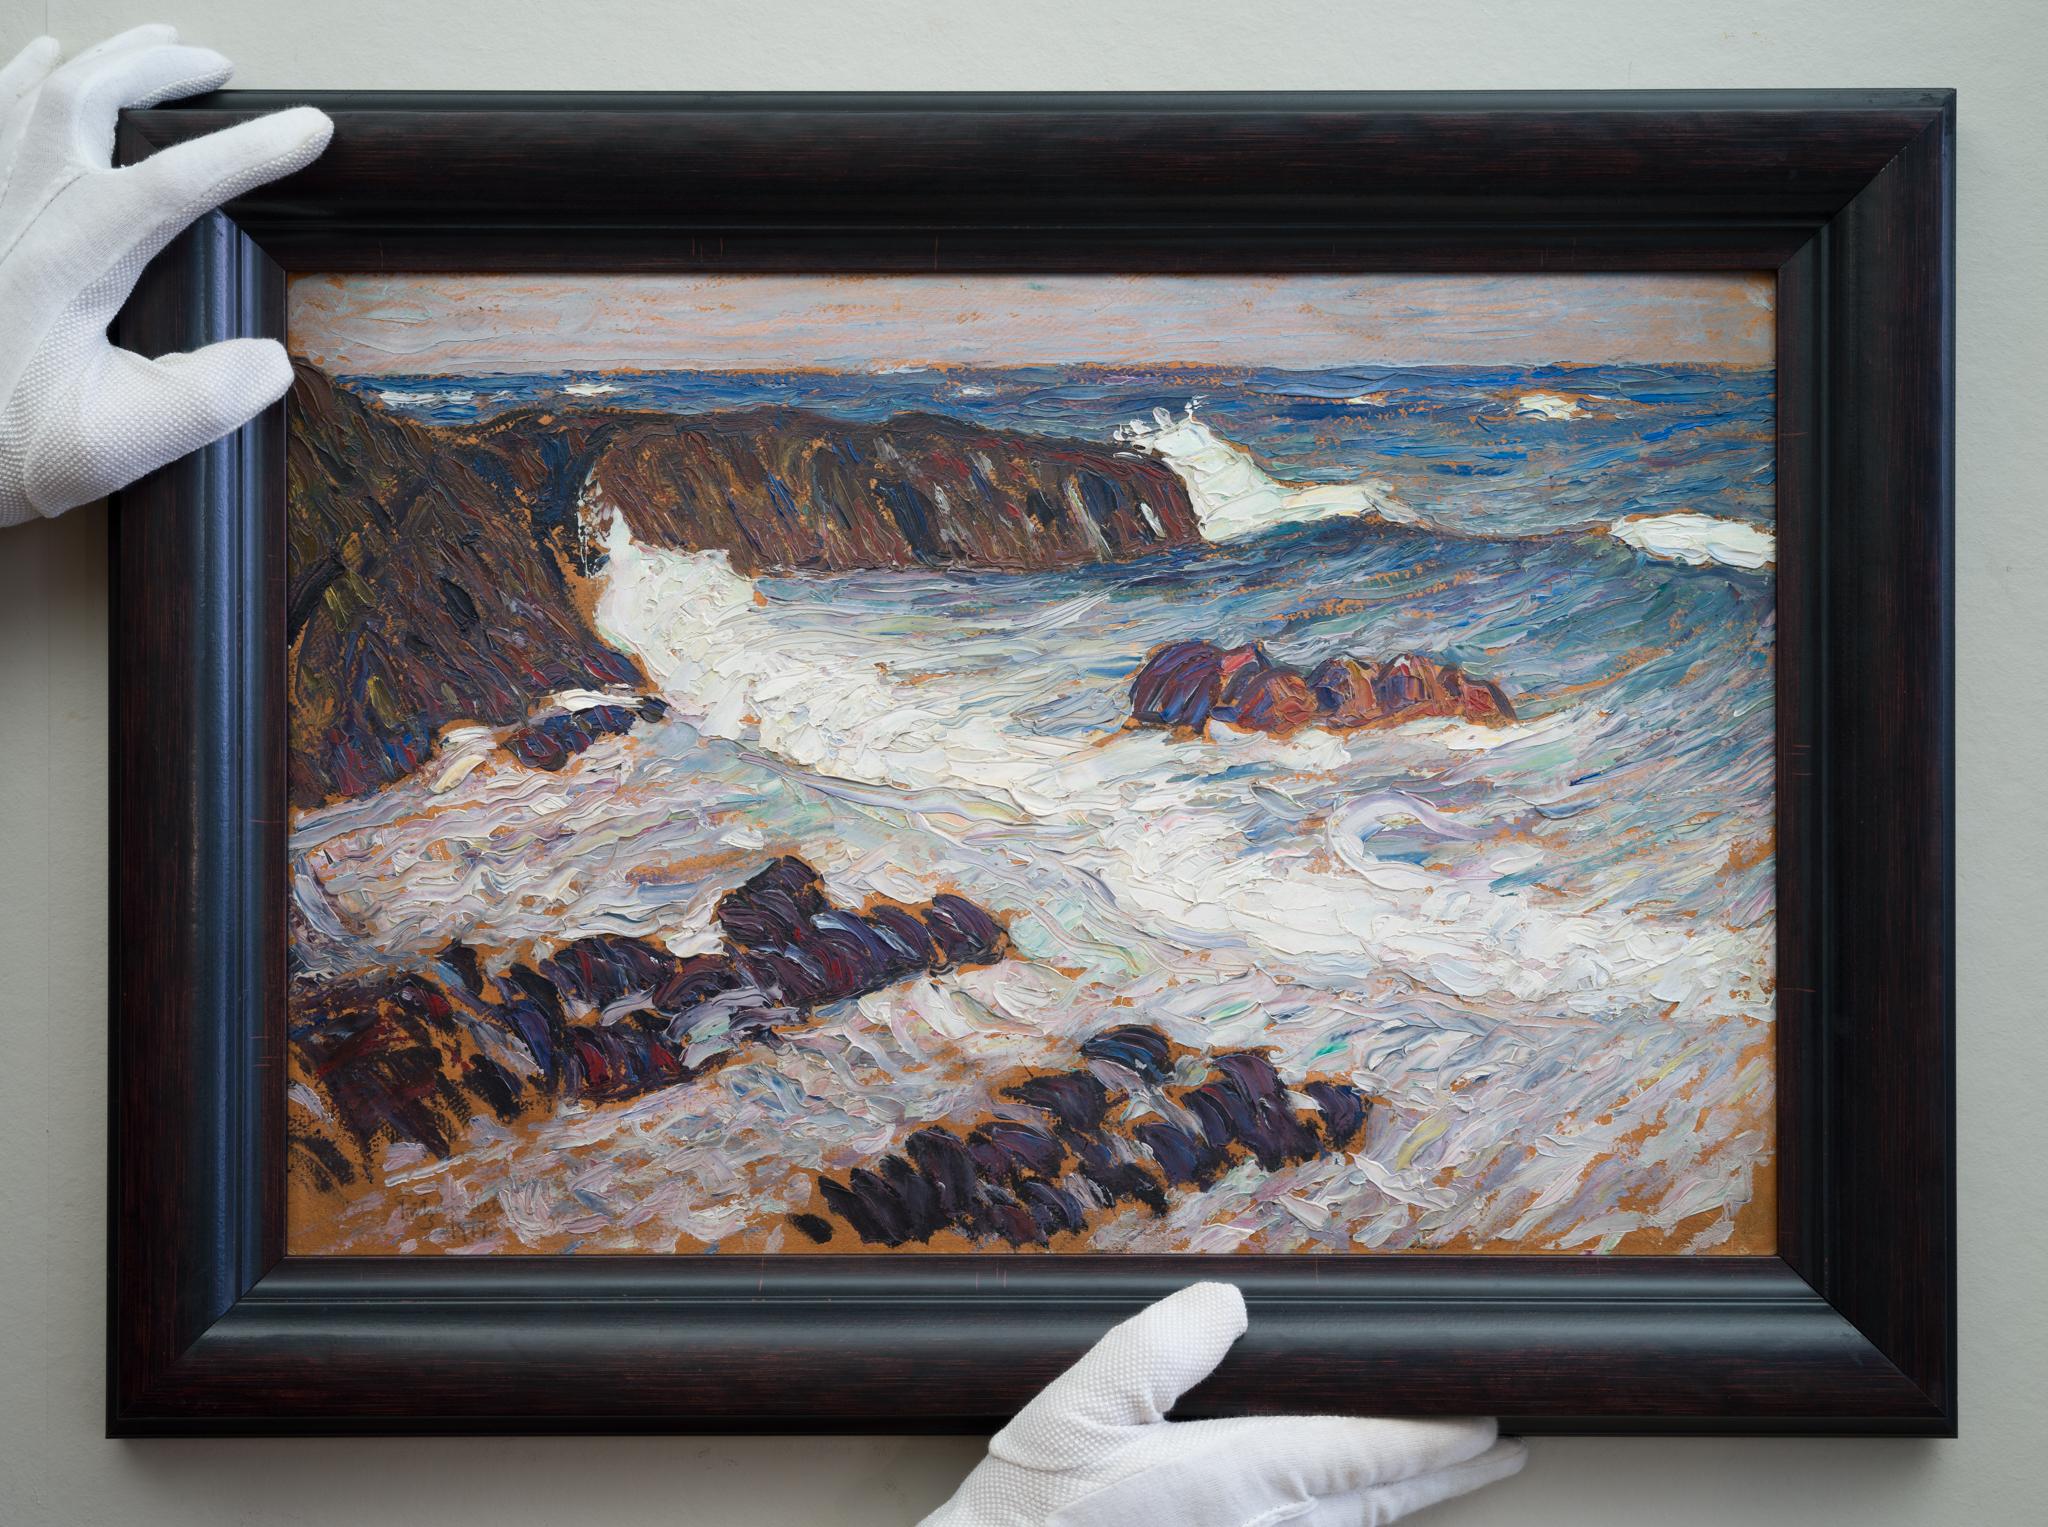 Fritz Lindström (1874-1962) Sweden

Saltwater (Kullen) 1917

oil on board
signed and dated Fritz Lindström 1917
board dimensions 35 x 52 cm
frame 47 x 64.5 cm

Essay: 
In the world of classic art, few paintings encapsulate the raw power and